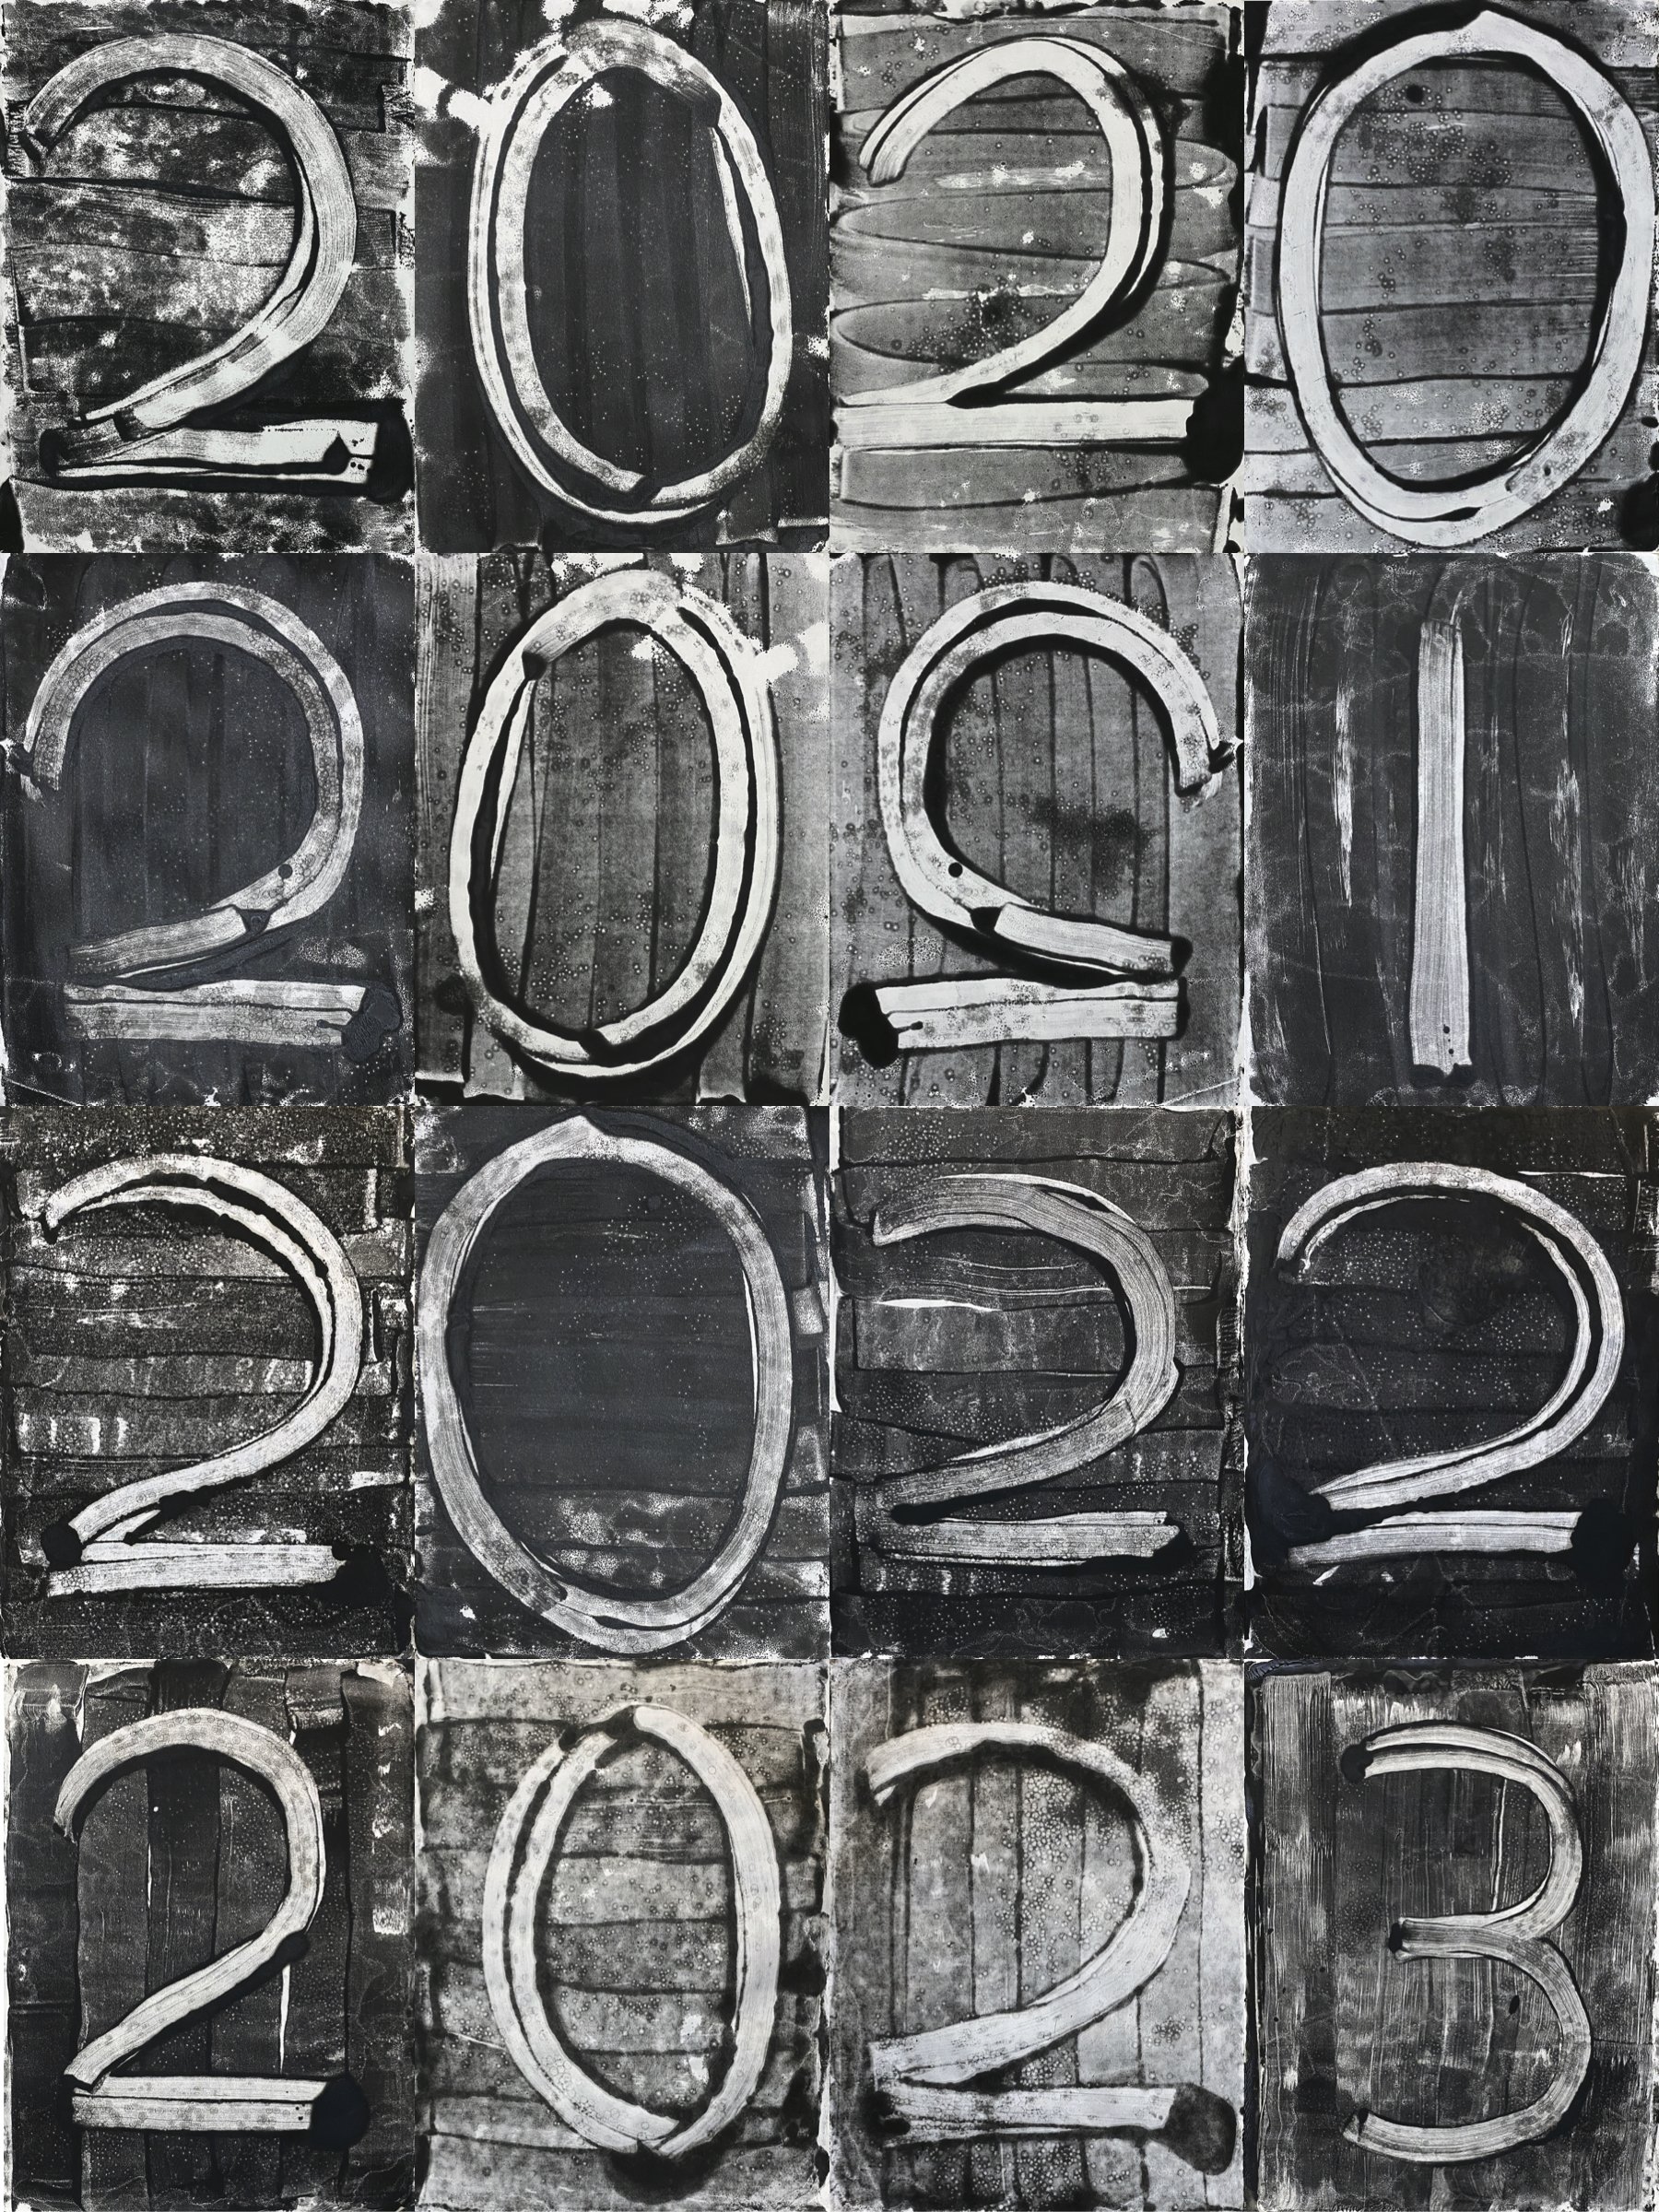  Toby Sisson, Hindsight (2020-2023), 2023. Encaustic monotype on panel mounted on wood panel, 16 24"x18" panels.  